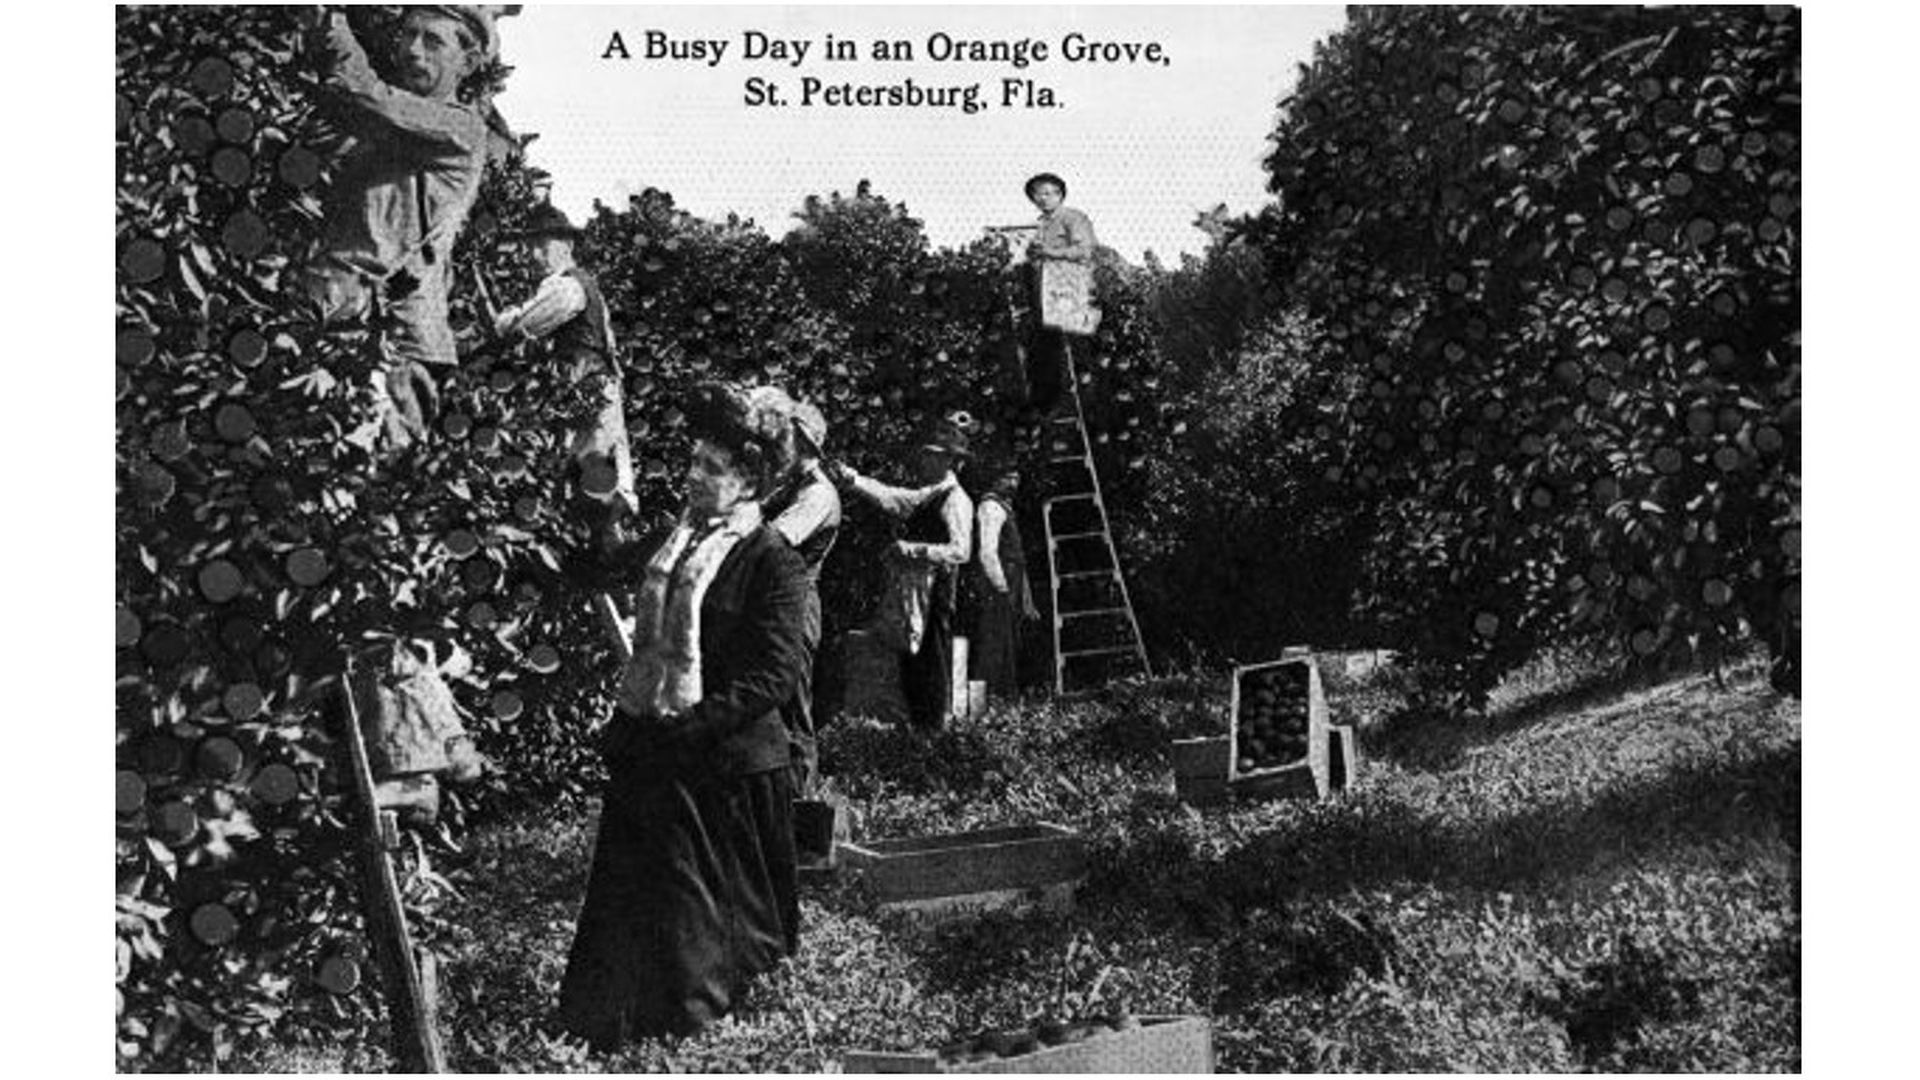 A postcard from St. Petersburg depicting people picking oranges.